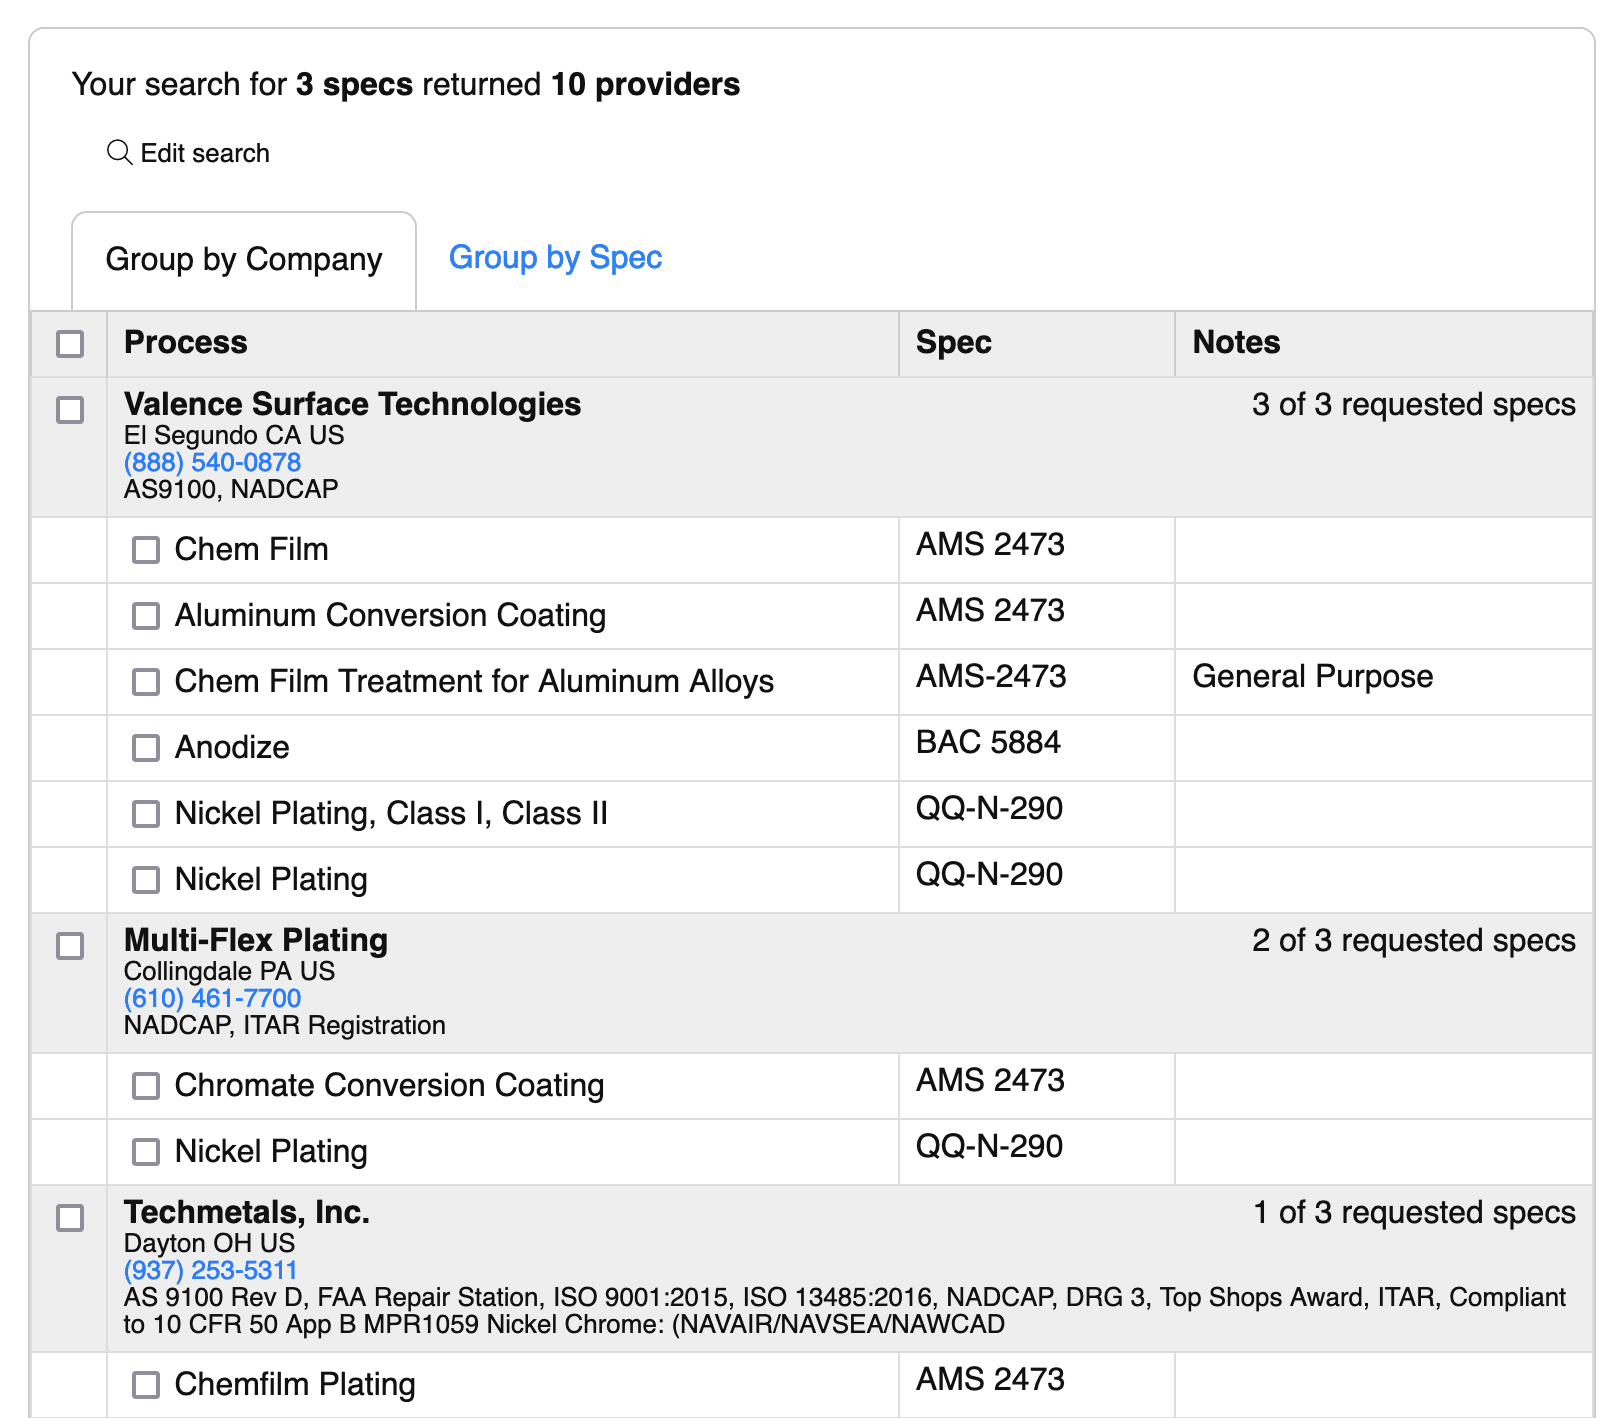 Processing Search Results Grouped By Company